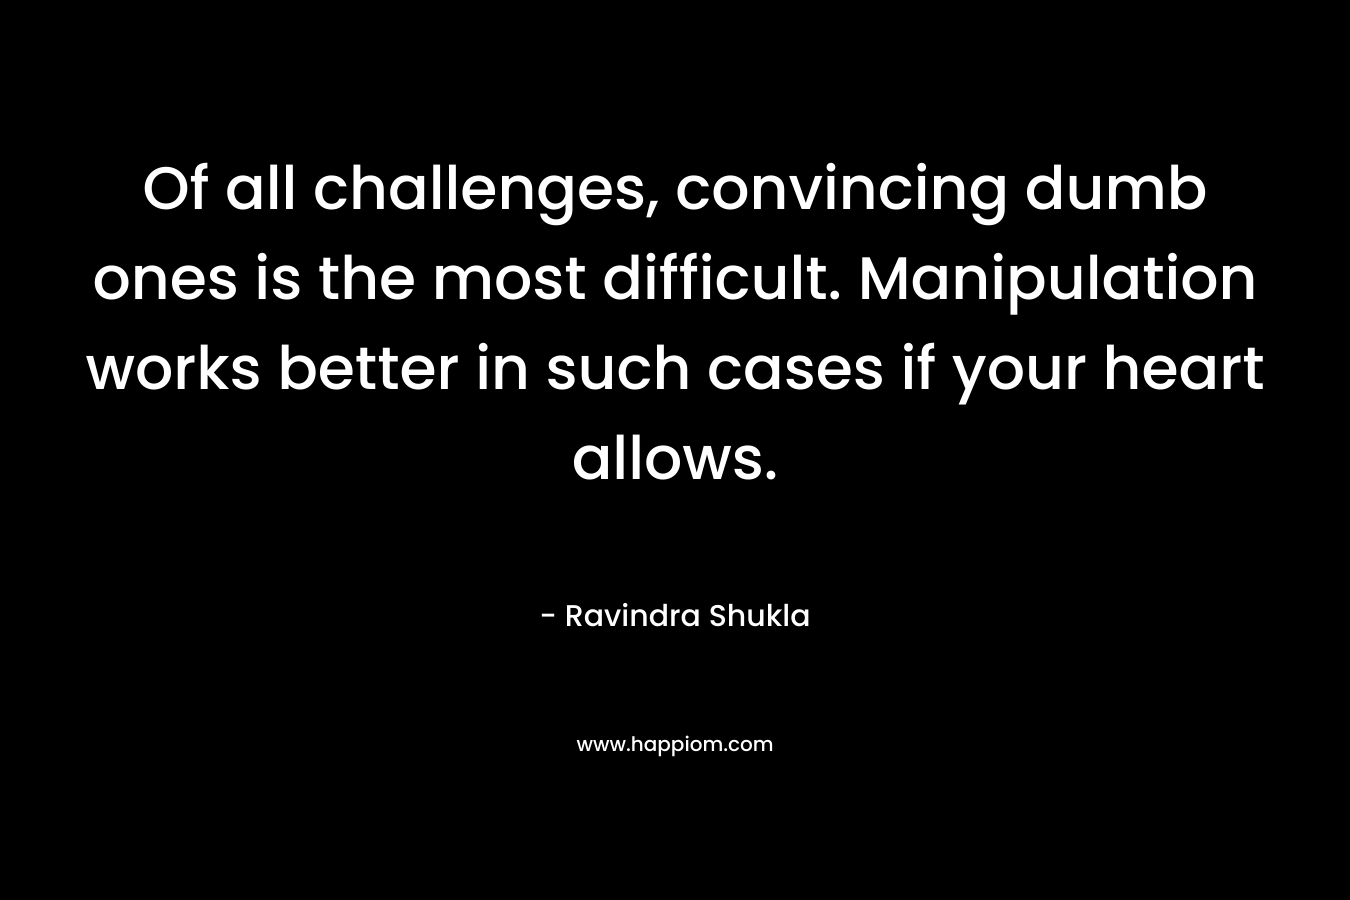 Of all challenges, convincing dumb ones is the most difficult. Manipulation works better in such cases if your heart allows. – Ravindra Shukla